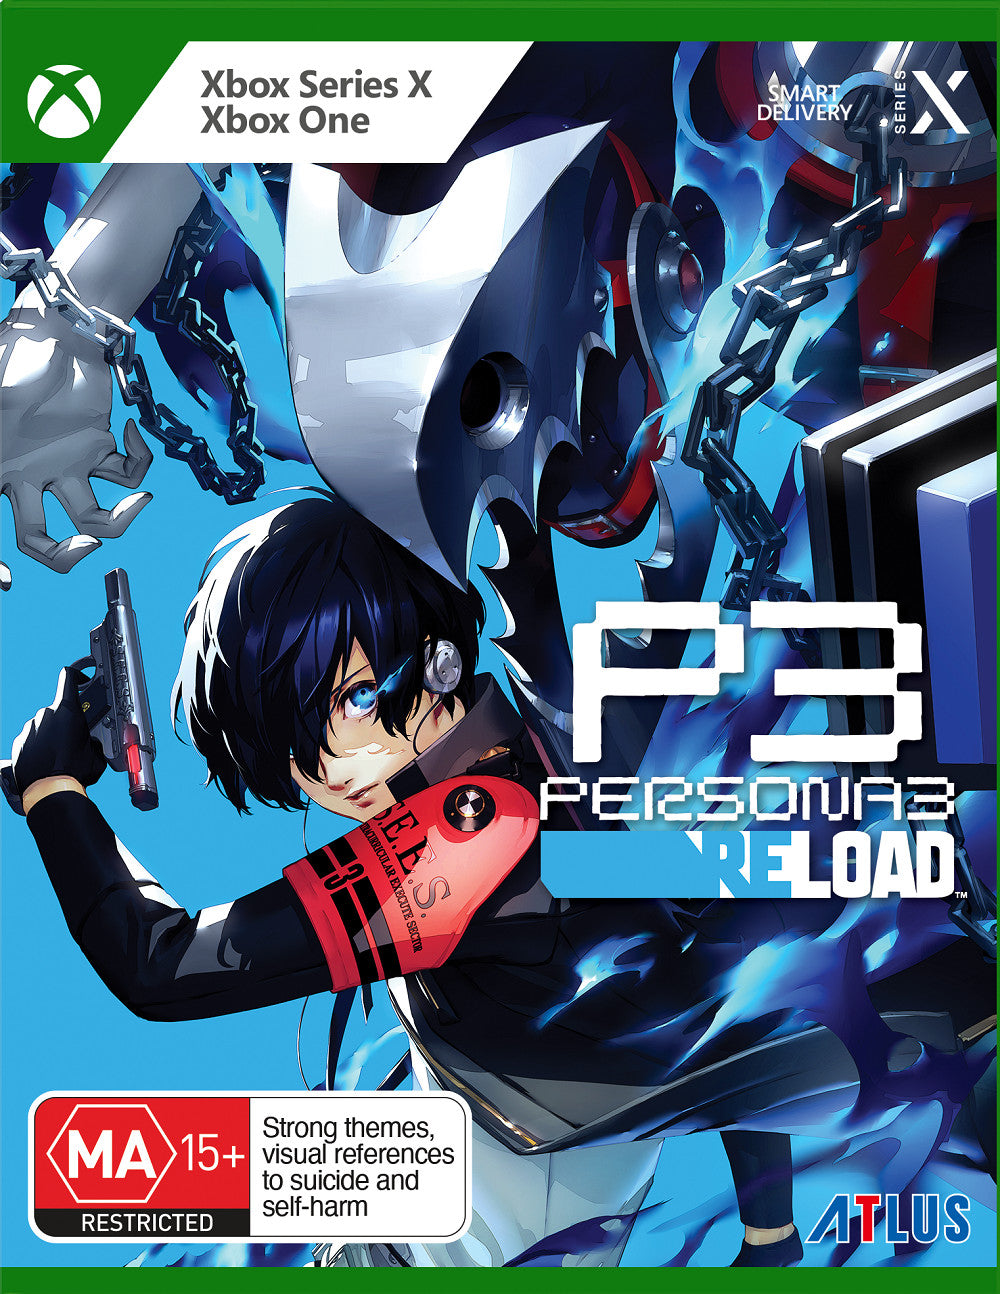 XBSX Persona 3: Reload